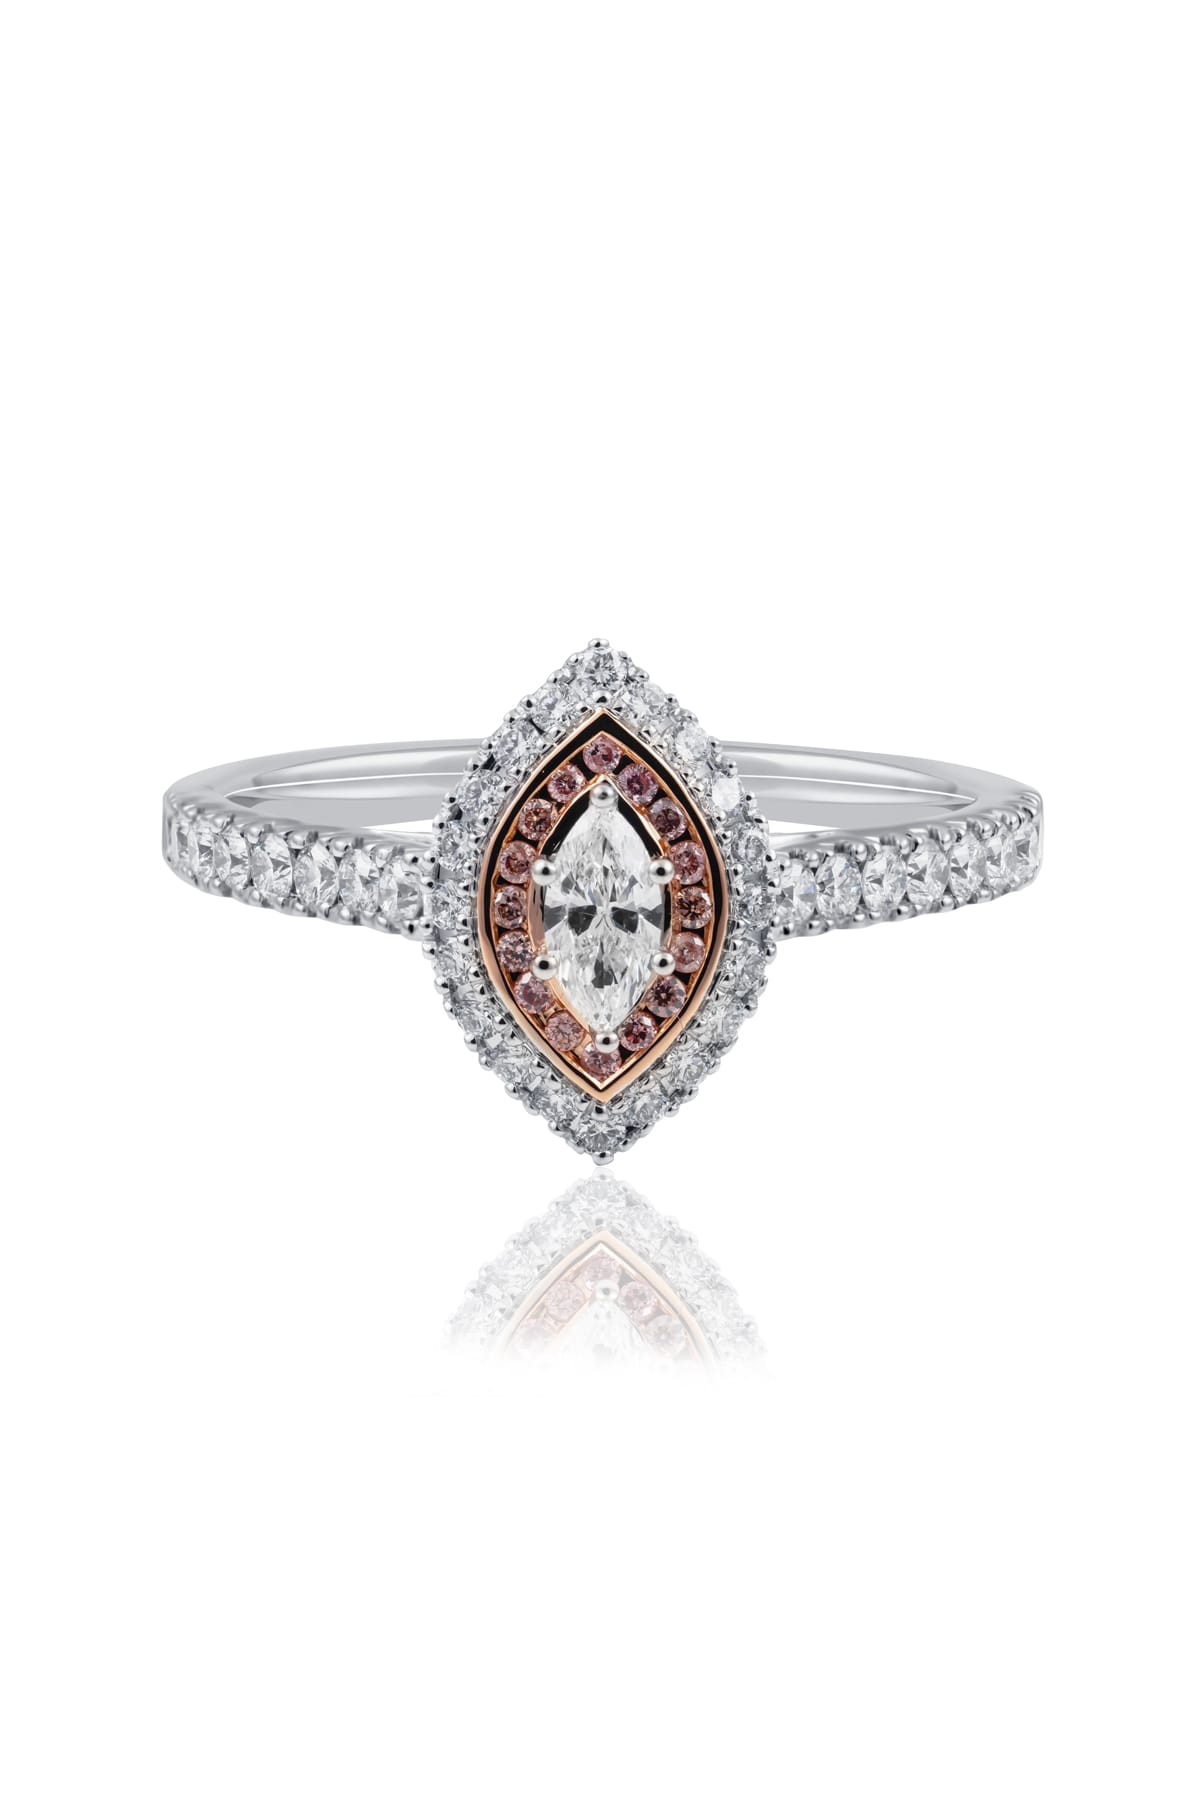 Marquise Diamond Halo Ring With A Halo OfArgyle Pink Diamonds from LeGassick.